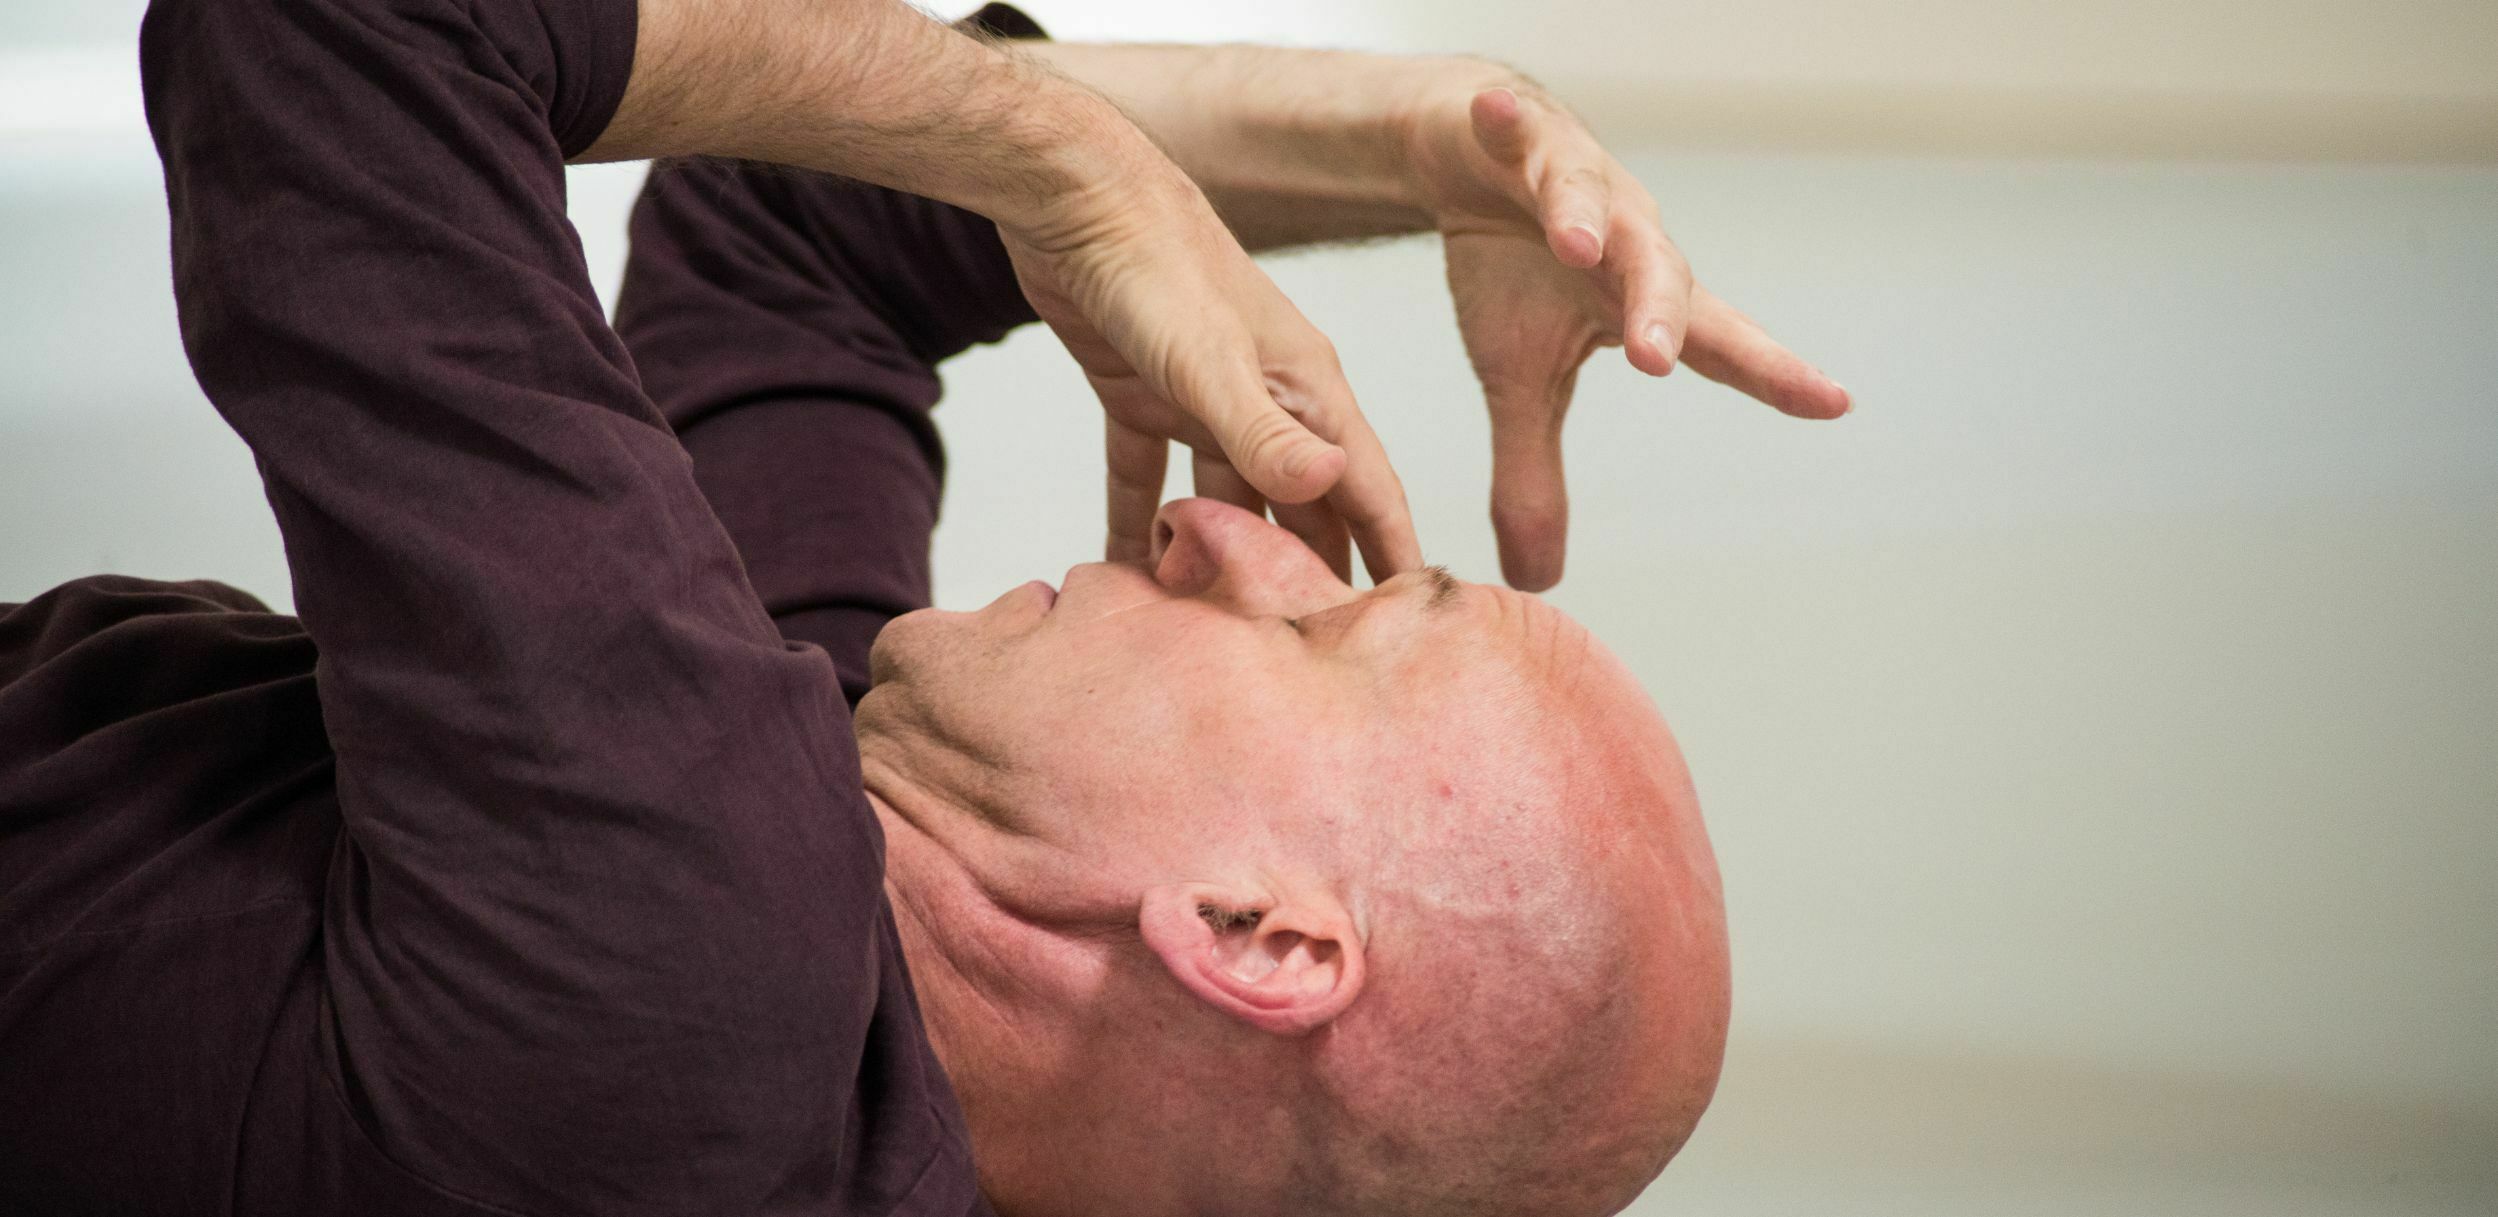 An intimate sculptural image of a dancer's bald head in profile. He's lying back on the ground, eyes closed. He seems to be having an intense experience - his fingers are scrunched and gnarly, poised mask-like in front of his face.